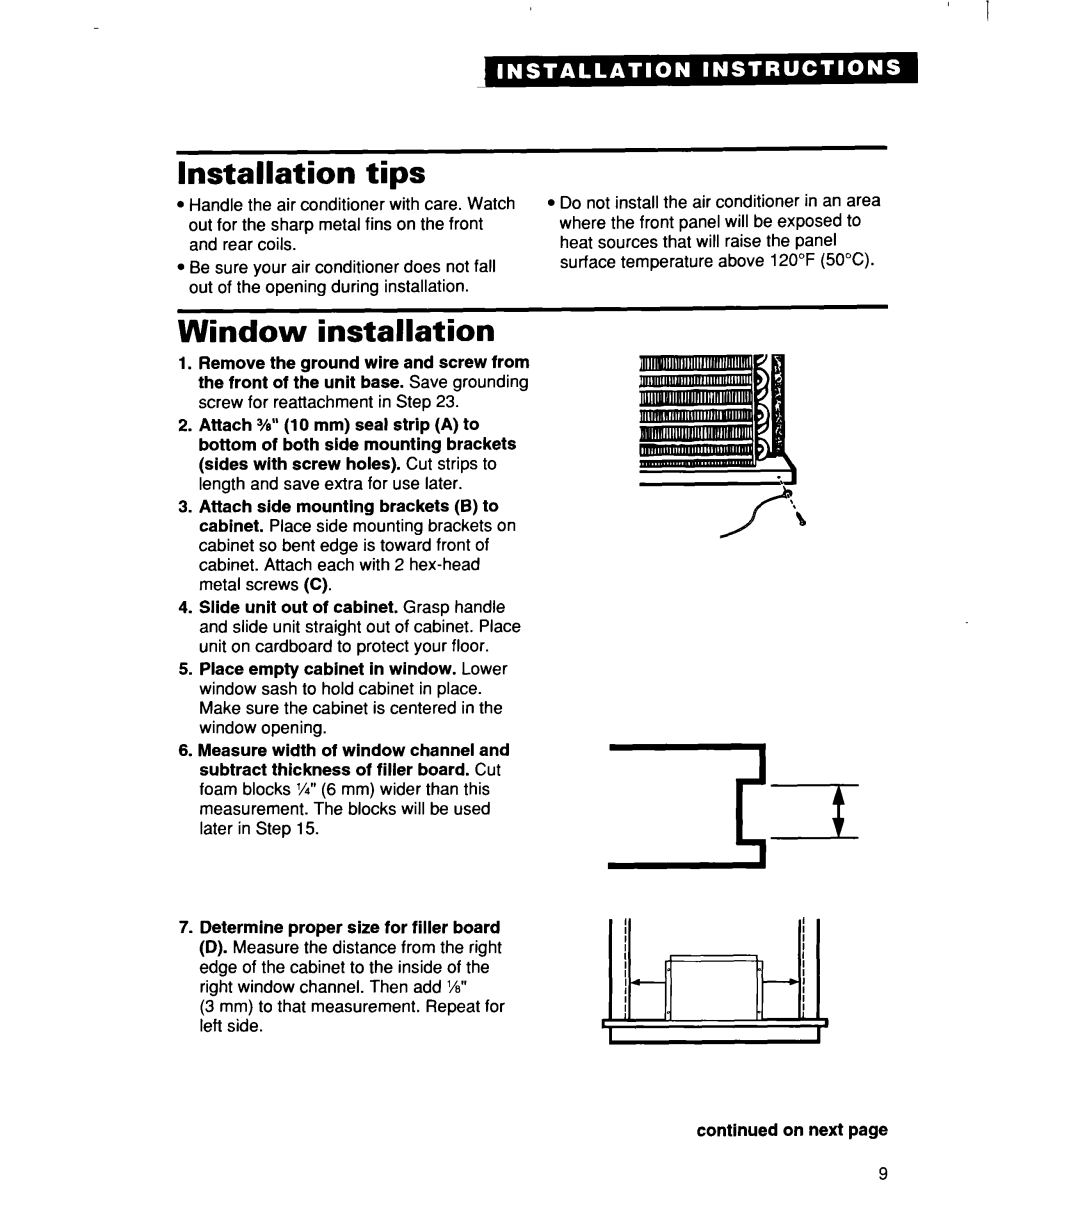 Whirlpool ACM 152XE0, ACM244XE0, ACM184XE0 important safety instructions Installation tips, Window installation, I I H 